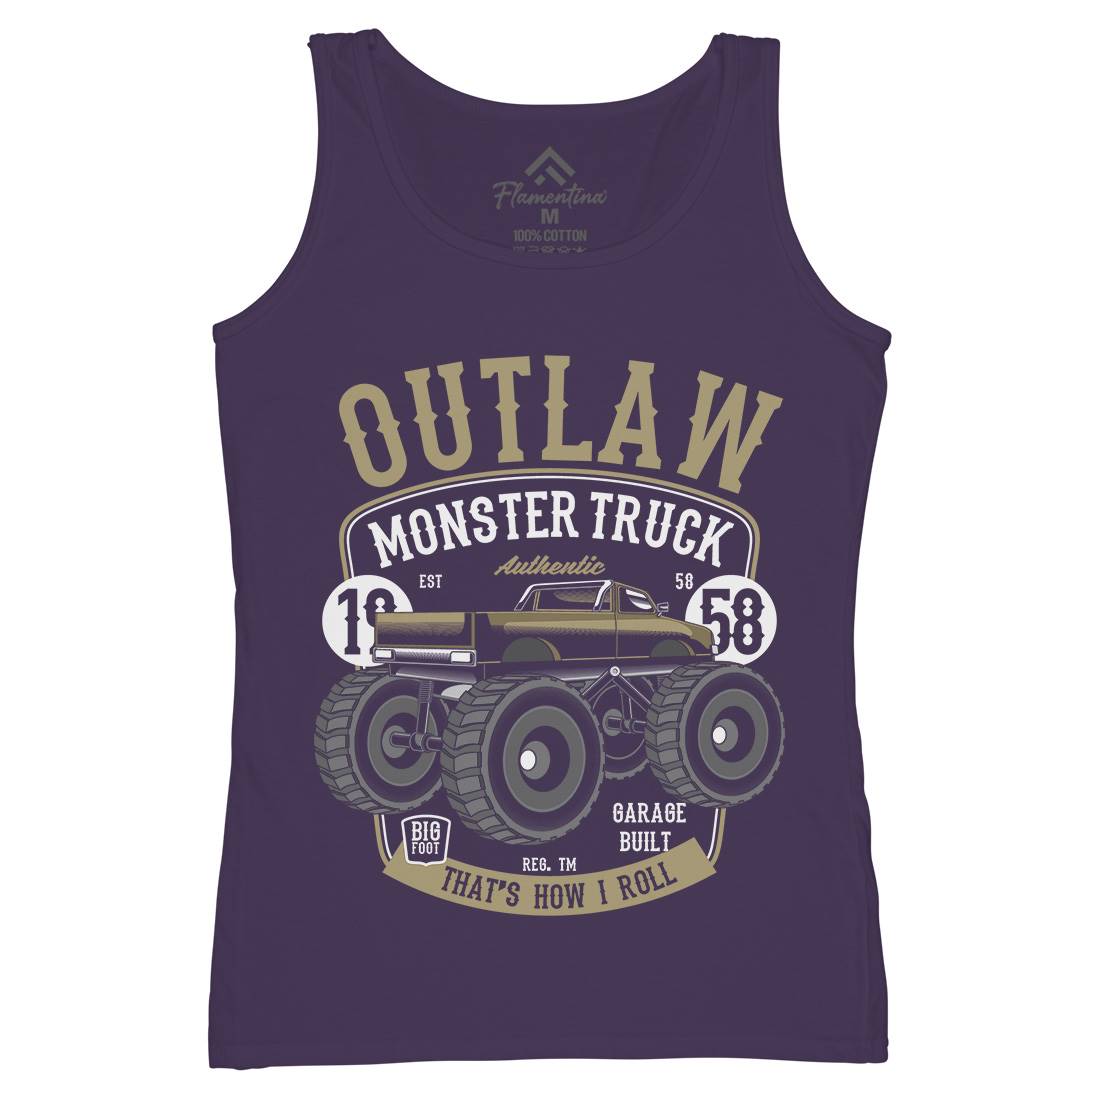 Outlaw Monster Truck Womens Organic Tank Top Vest Vehicles C408